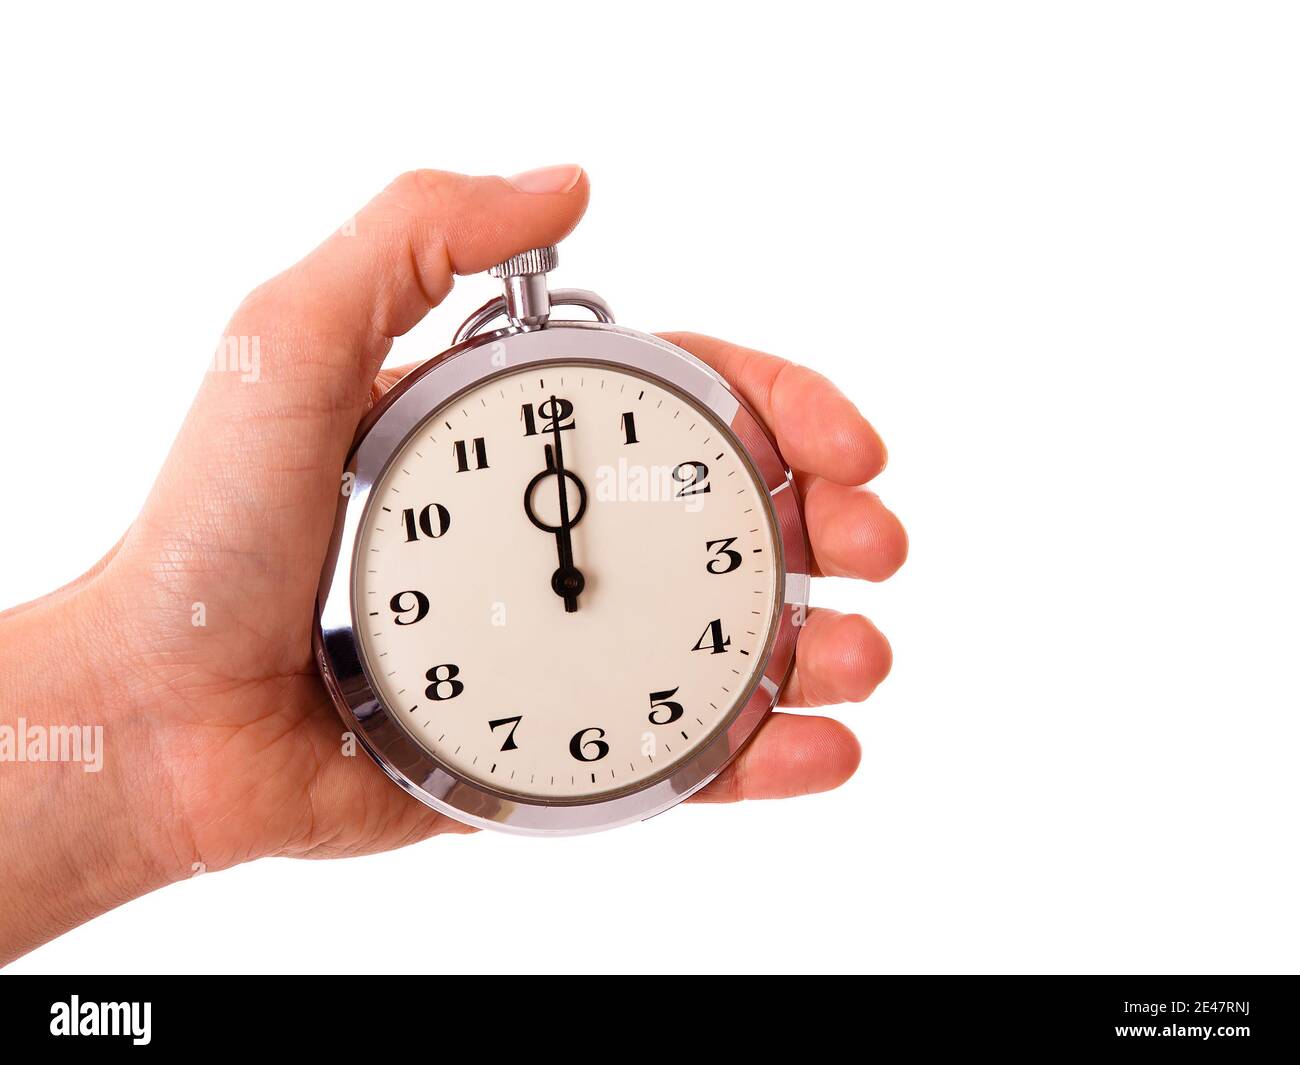 Vintage style watch on hand to check the time. Concept for managing time, deadlines, punctuality, on time delivery, speed and appointment. Stock Photo